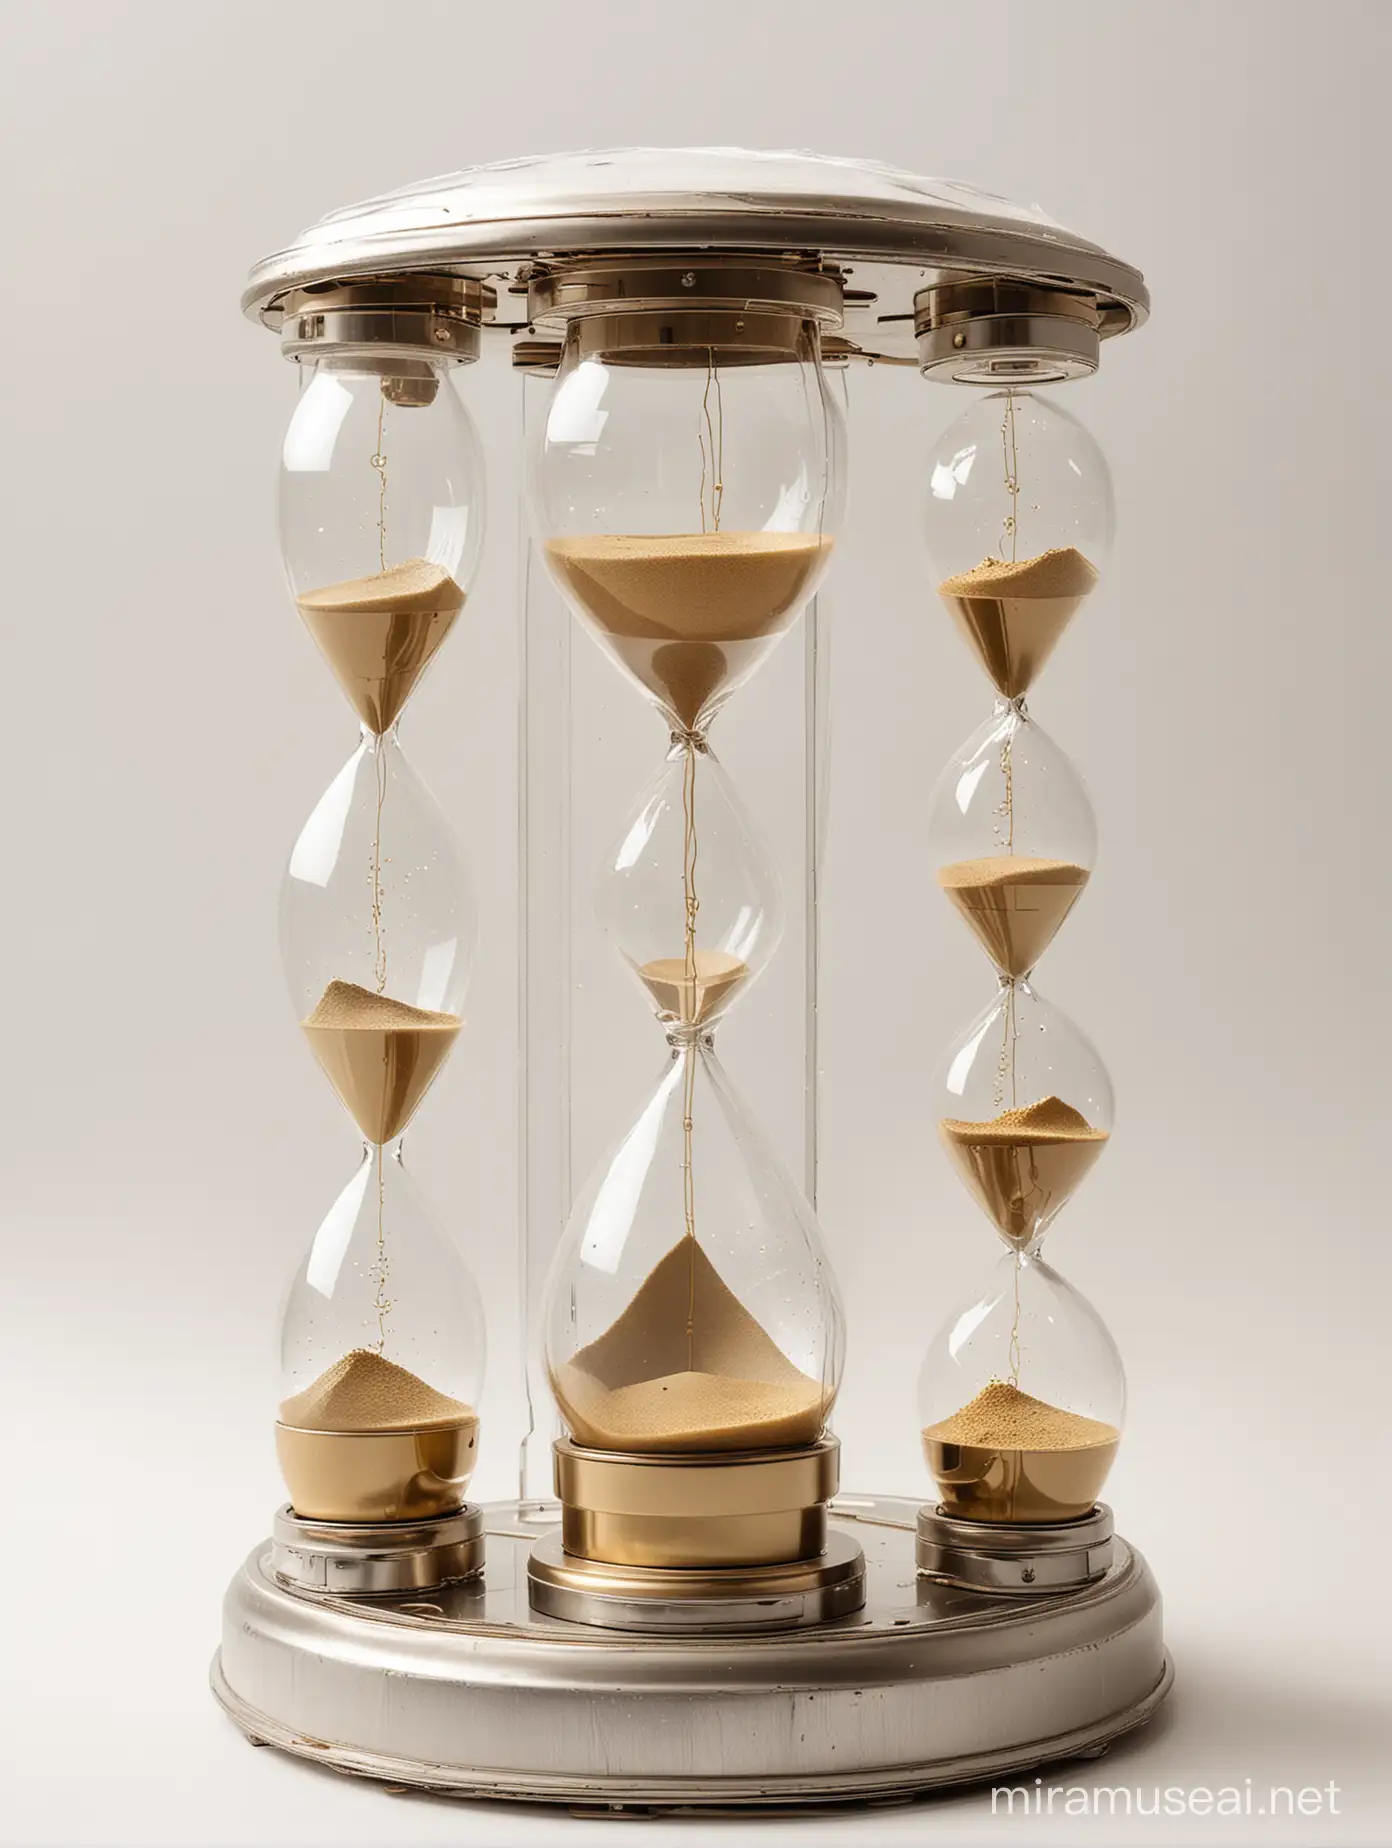 Timemachine made from 12 hourglasses. Banks are situated from up to down. golden sand inside. Timemachine stands on silver wrinkled fabric. Clear white backround.